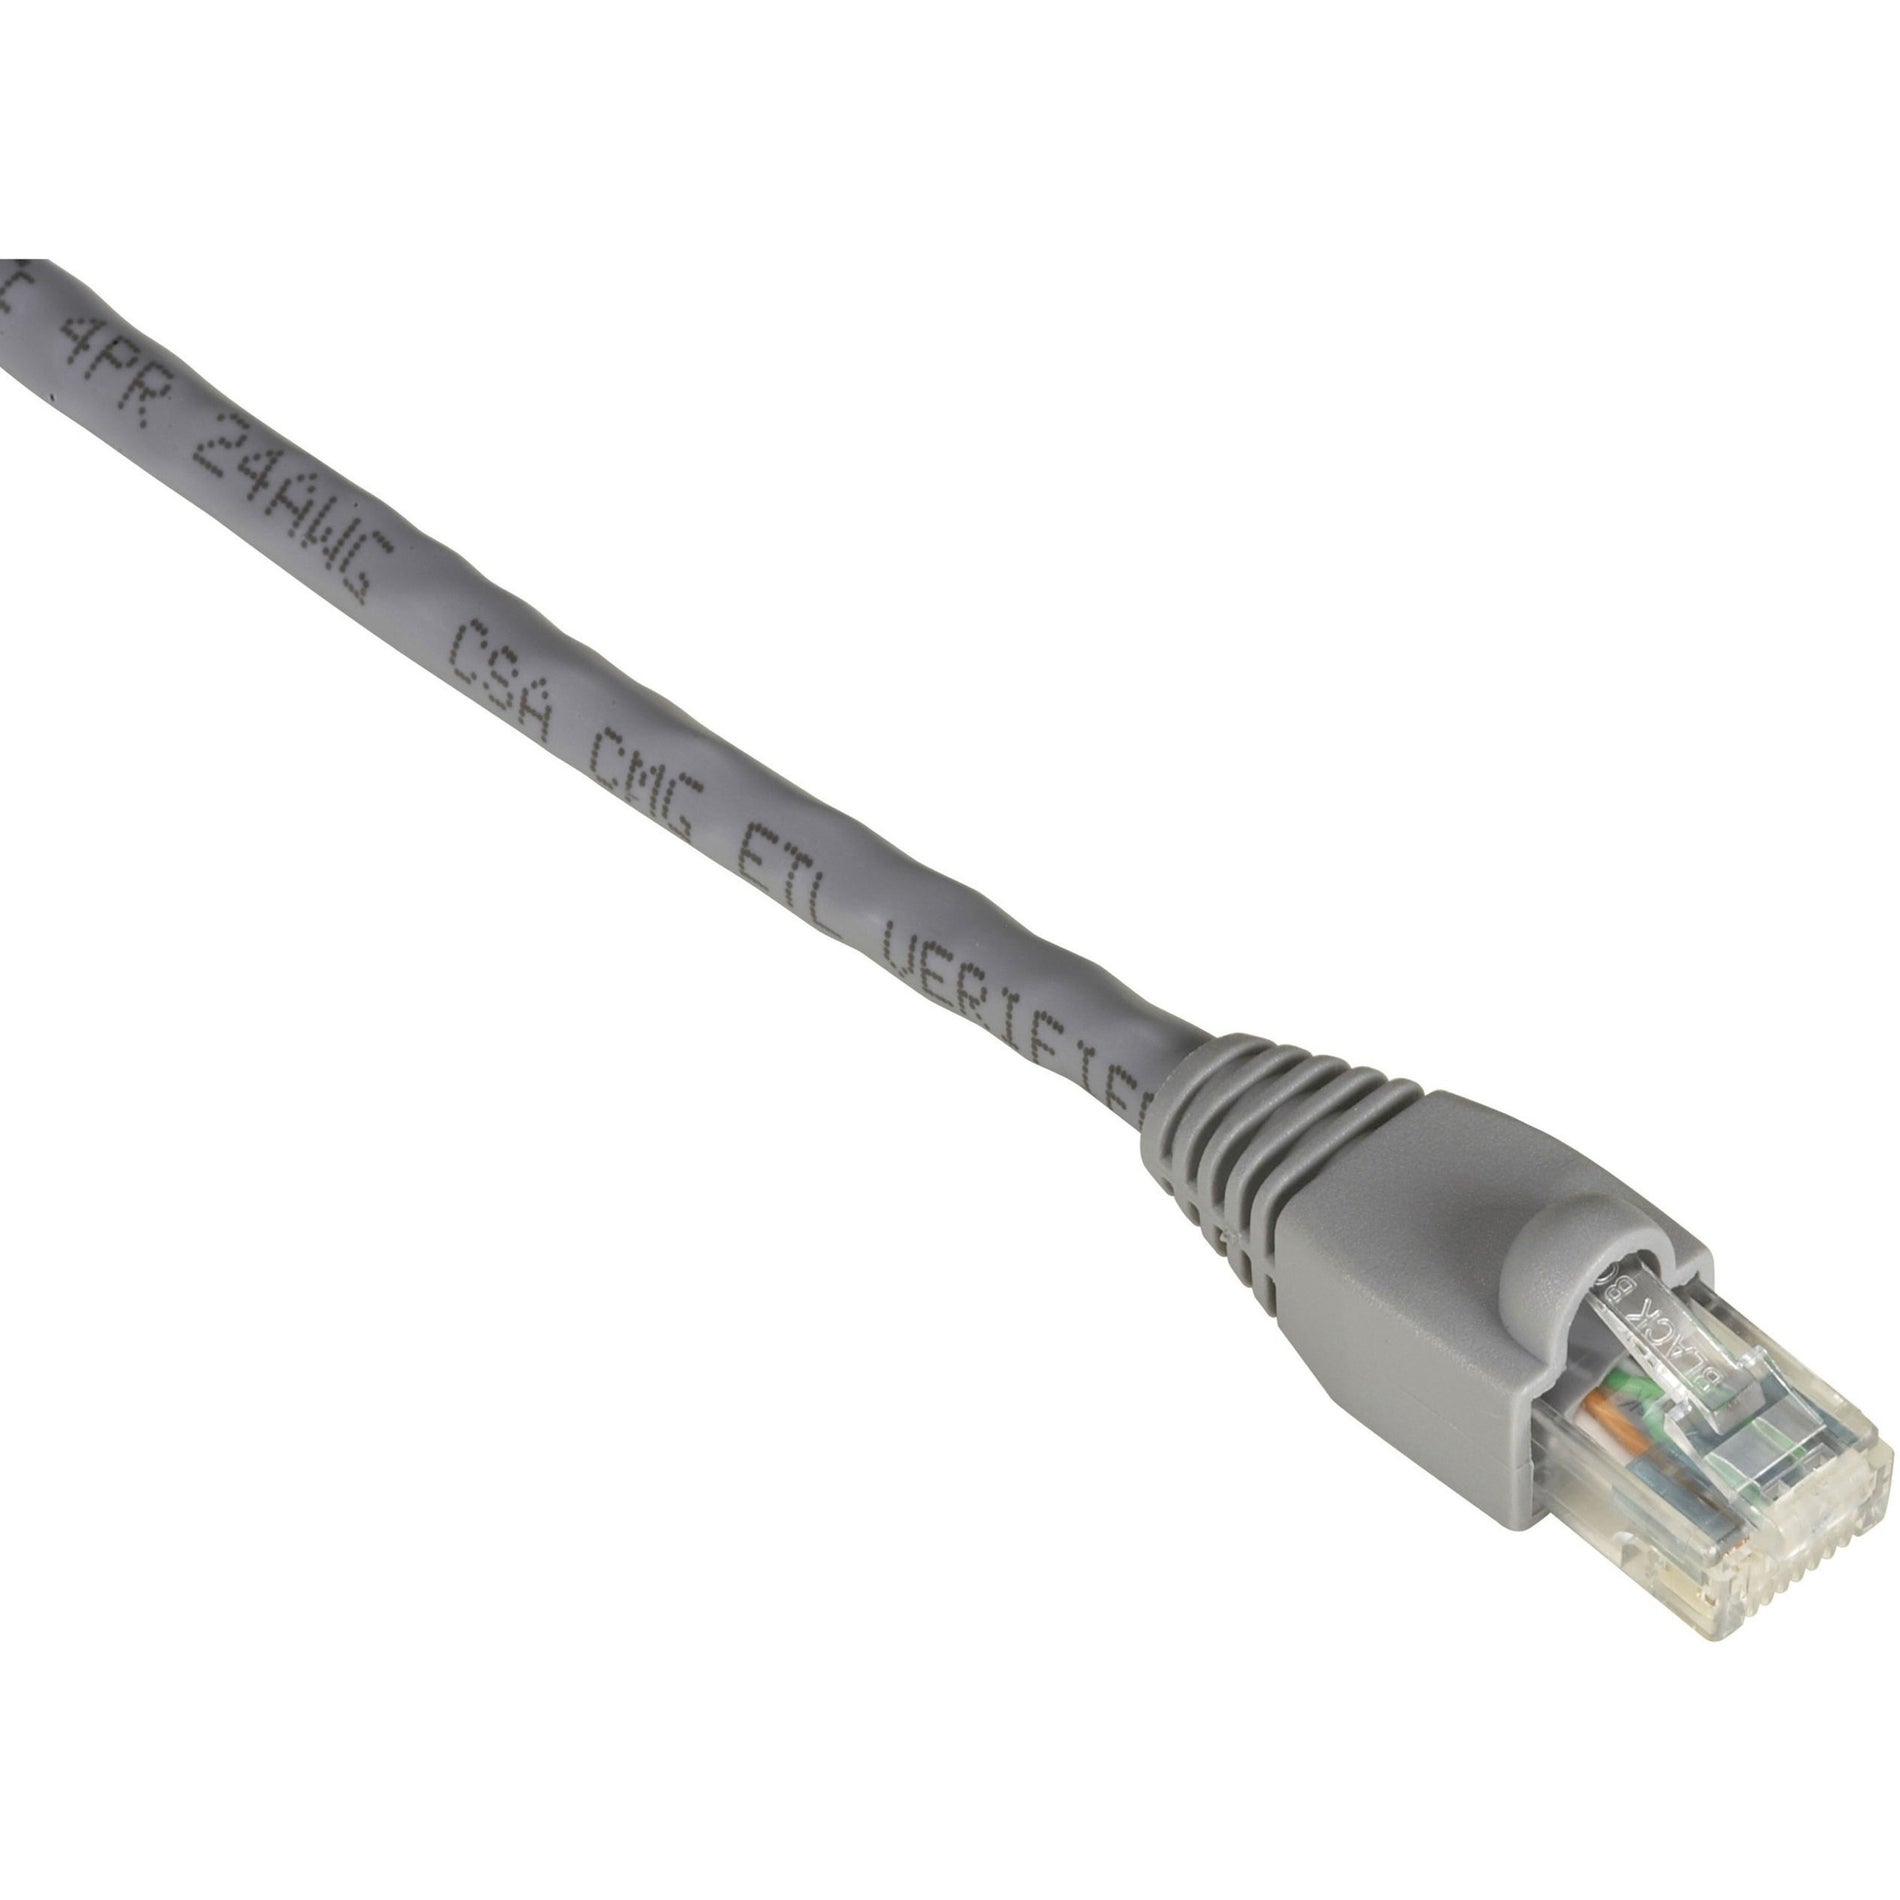 Black Box EVNSL640-0003 GigaTrue Cat.6 UTP Patch Cable, 3 ft, Clean Data and Video Transmission